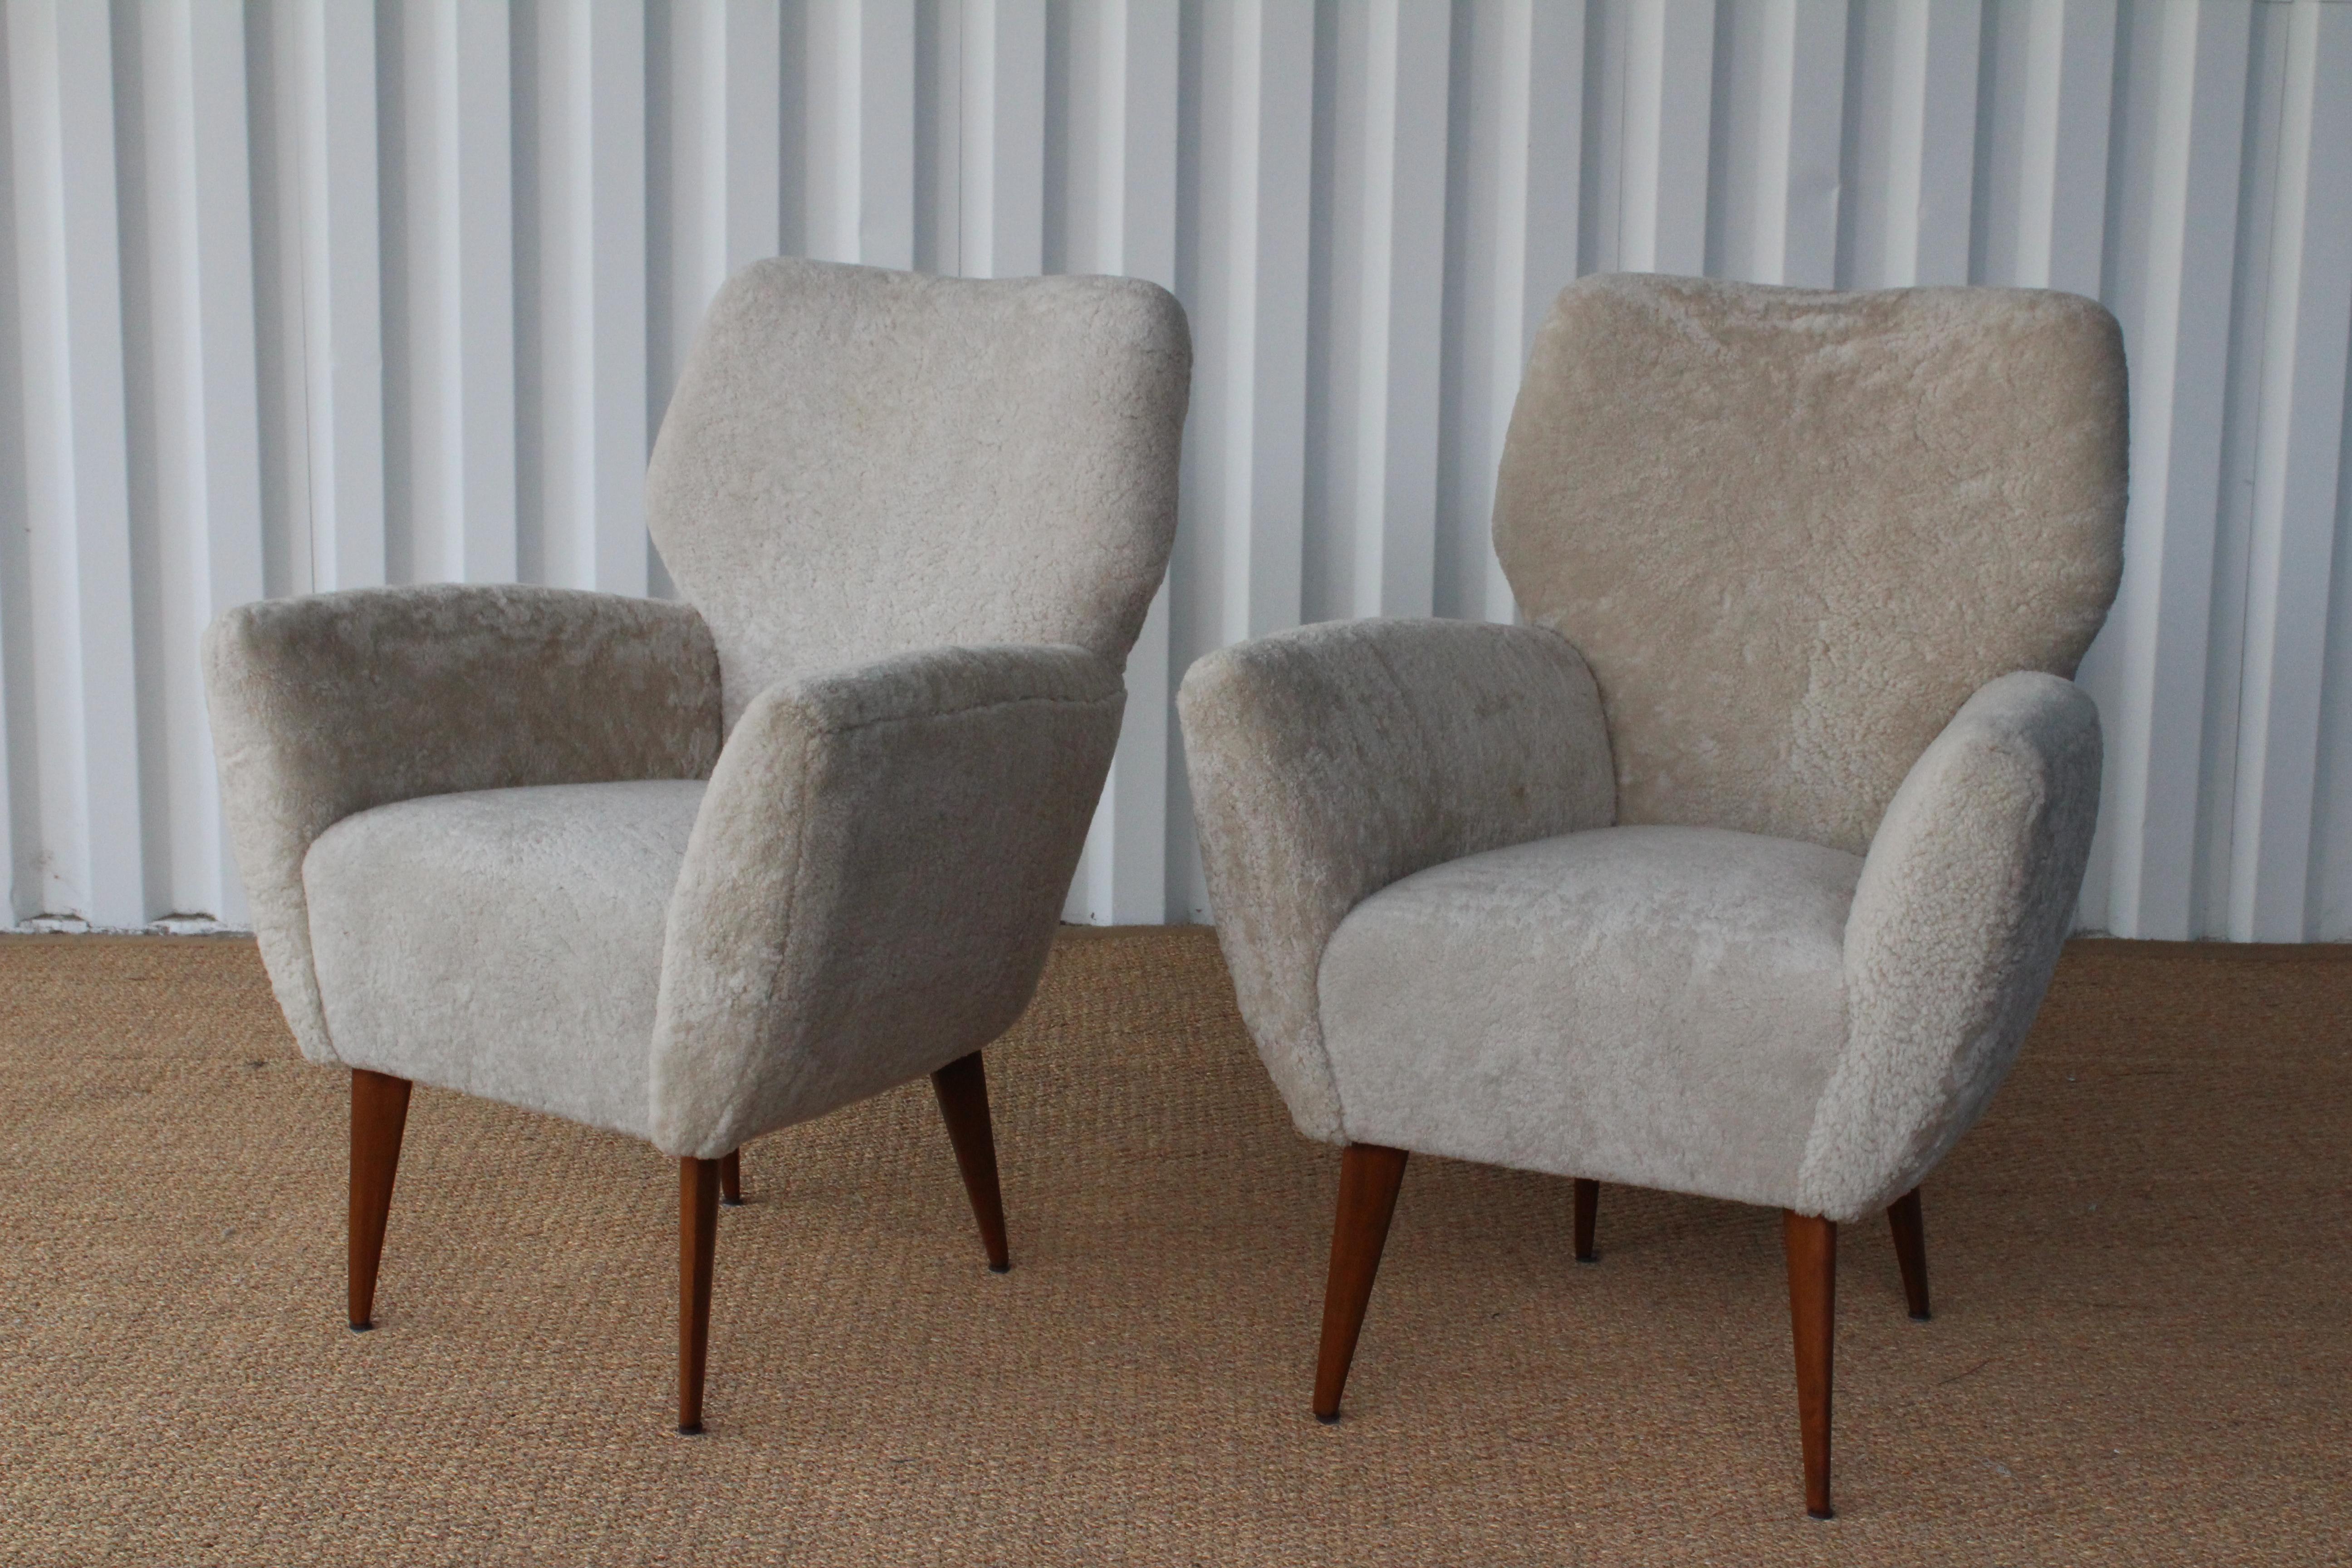 Pair of armchairs upholstered in shearling, Italy, 1950s. In the manner of Gio Ponti. Newly upholstered in a luxurious white shearling, walnut legs have been refinished. Sold as a pair.